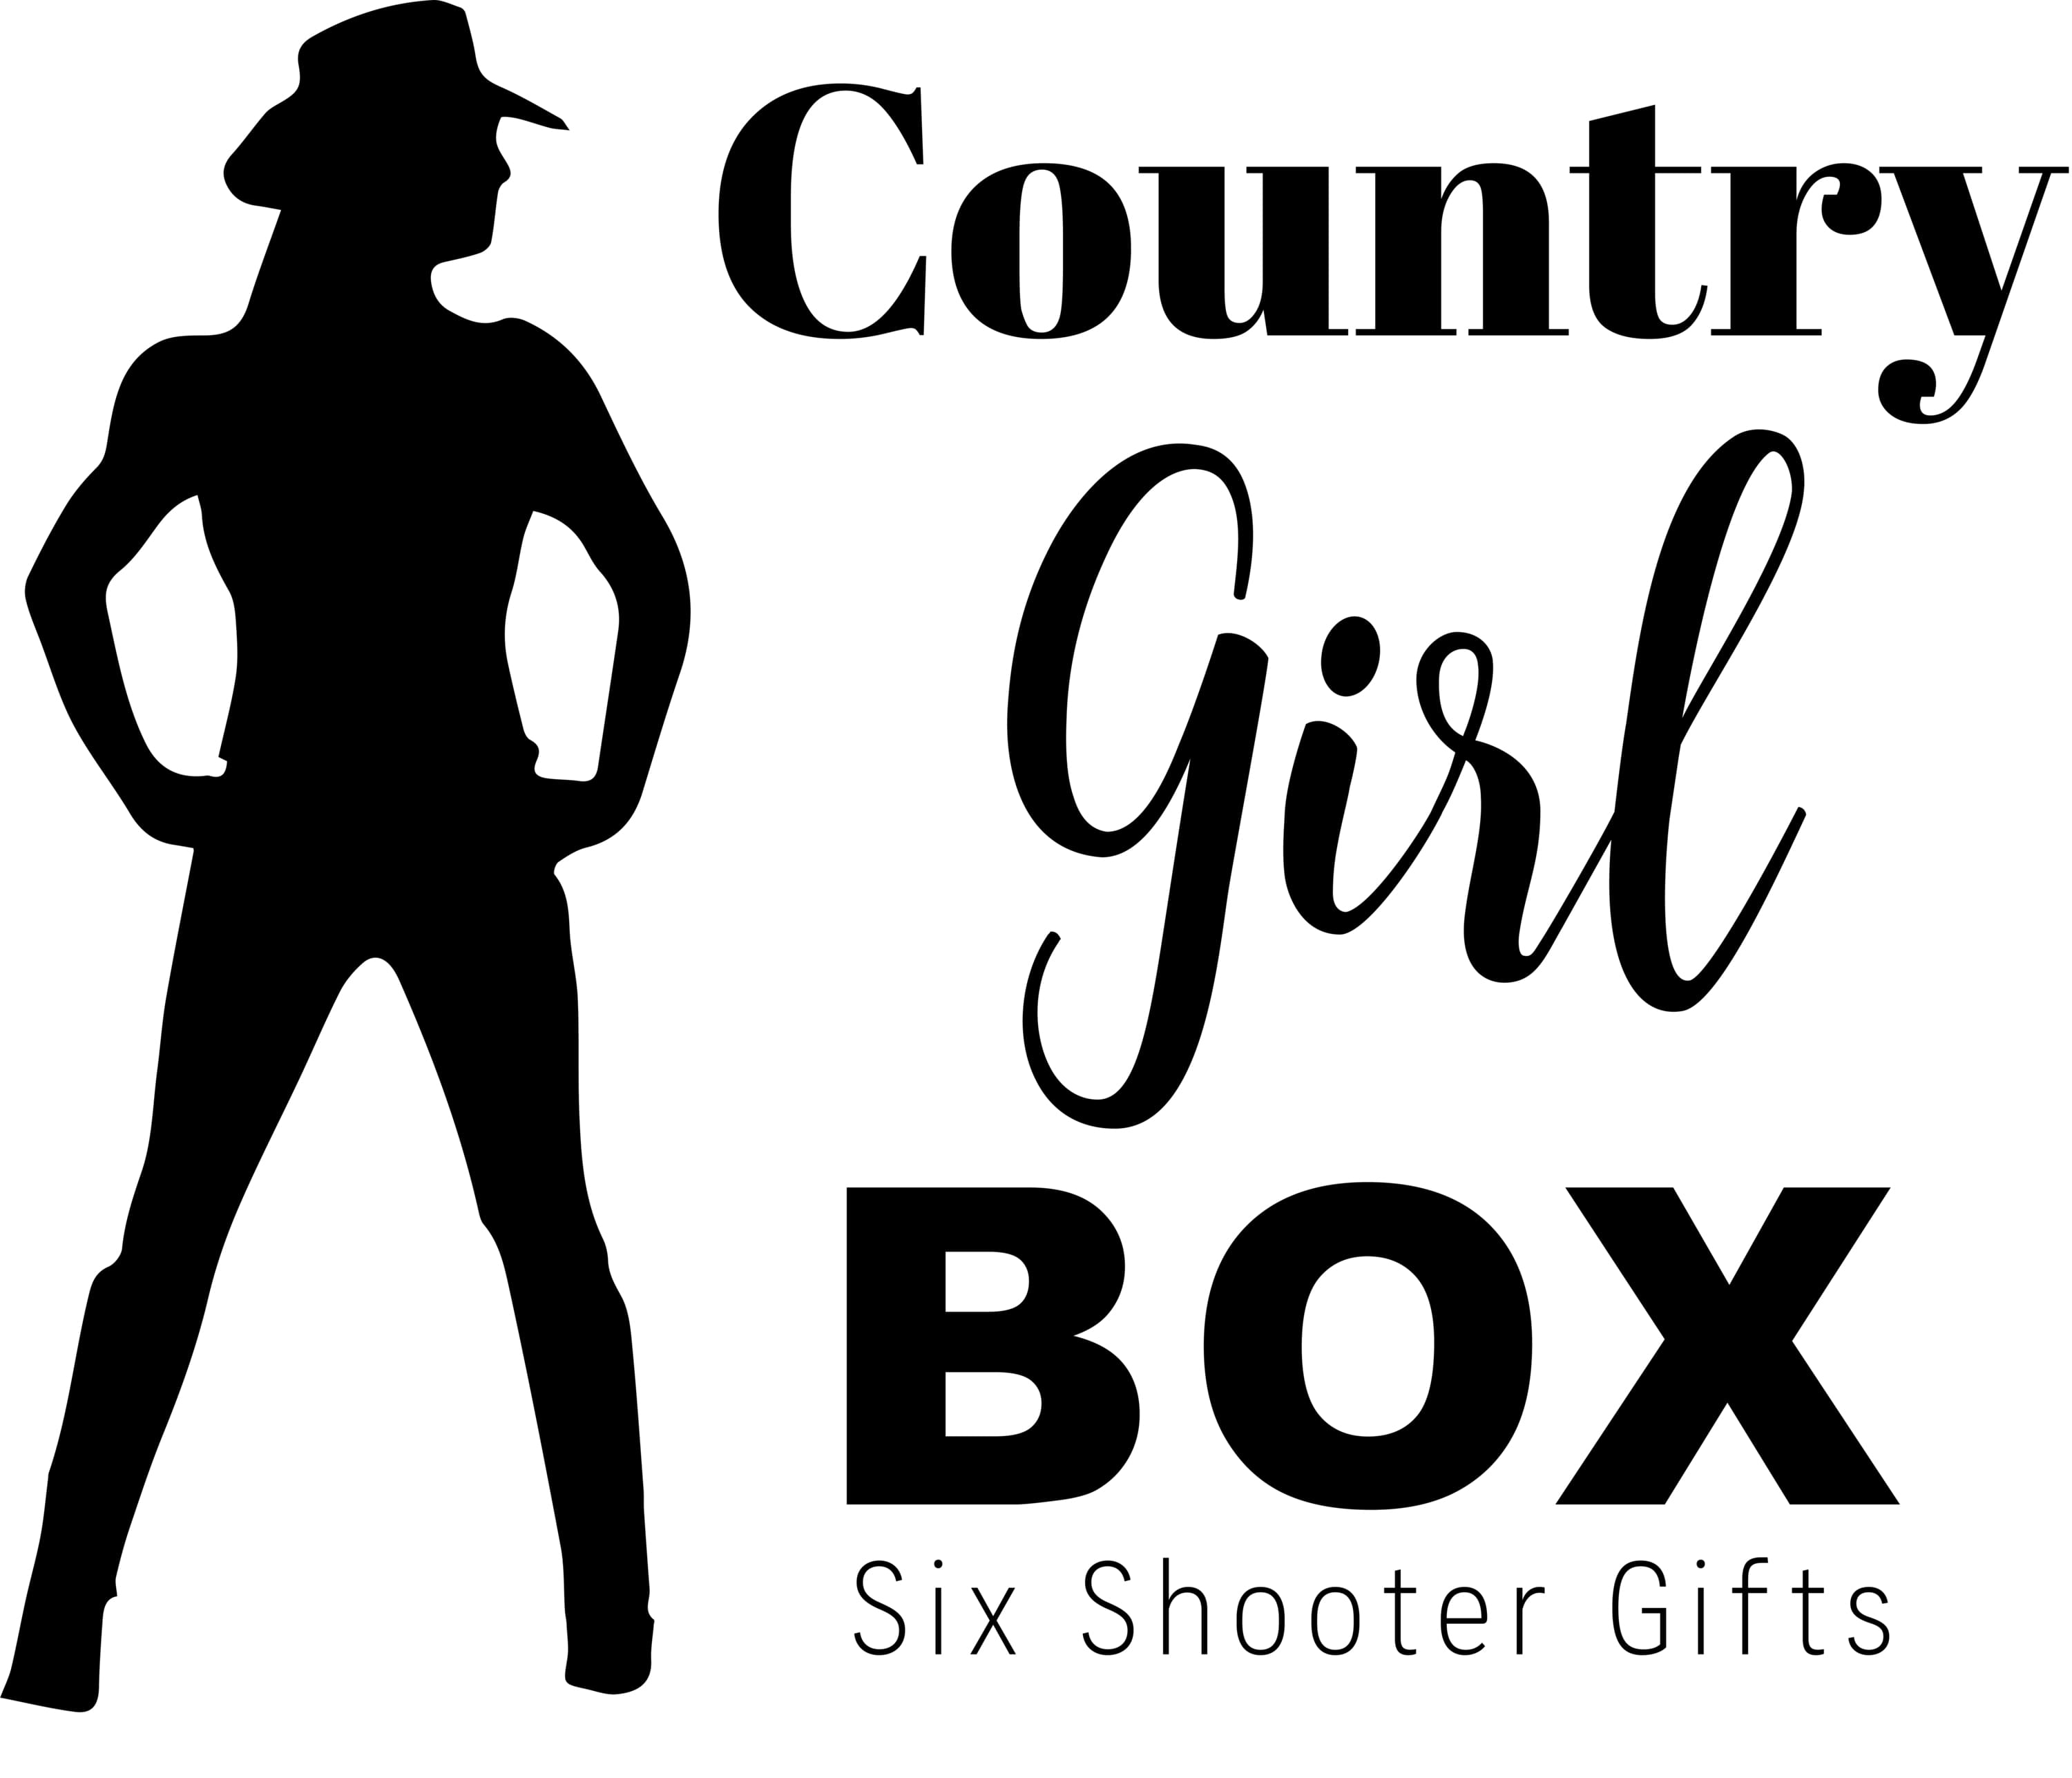 Six Shooter Gifts